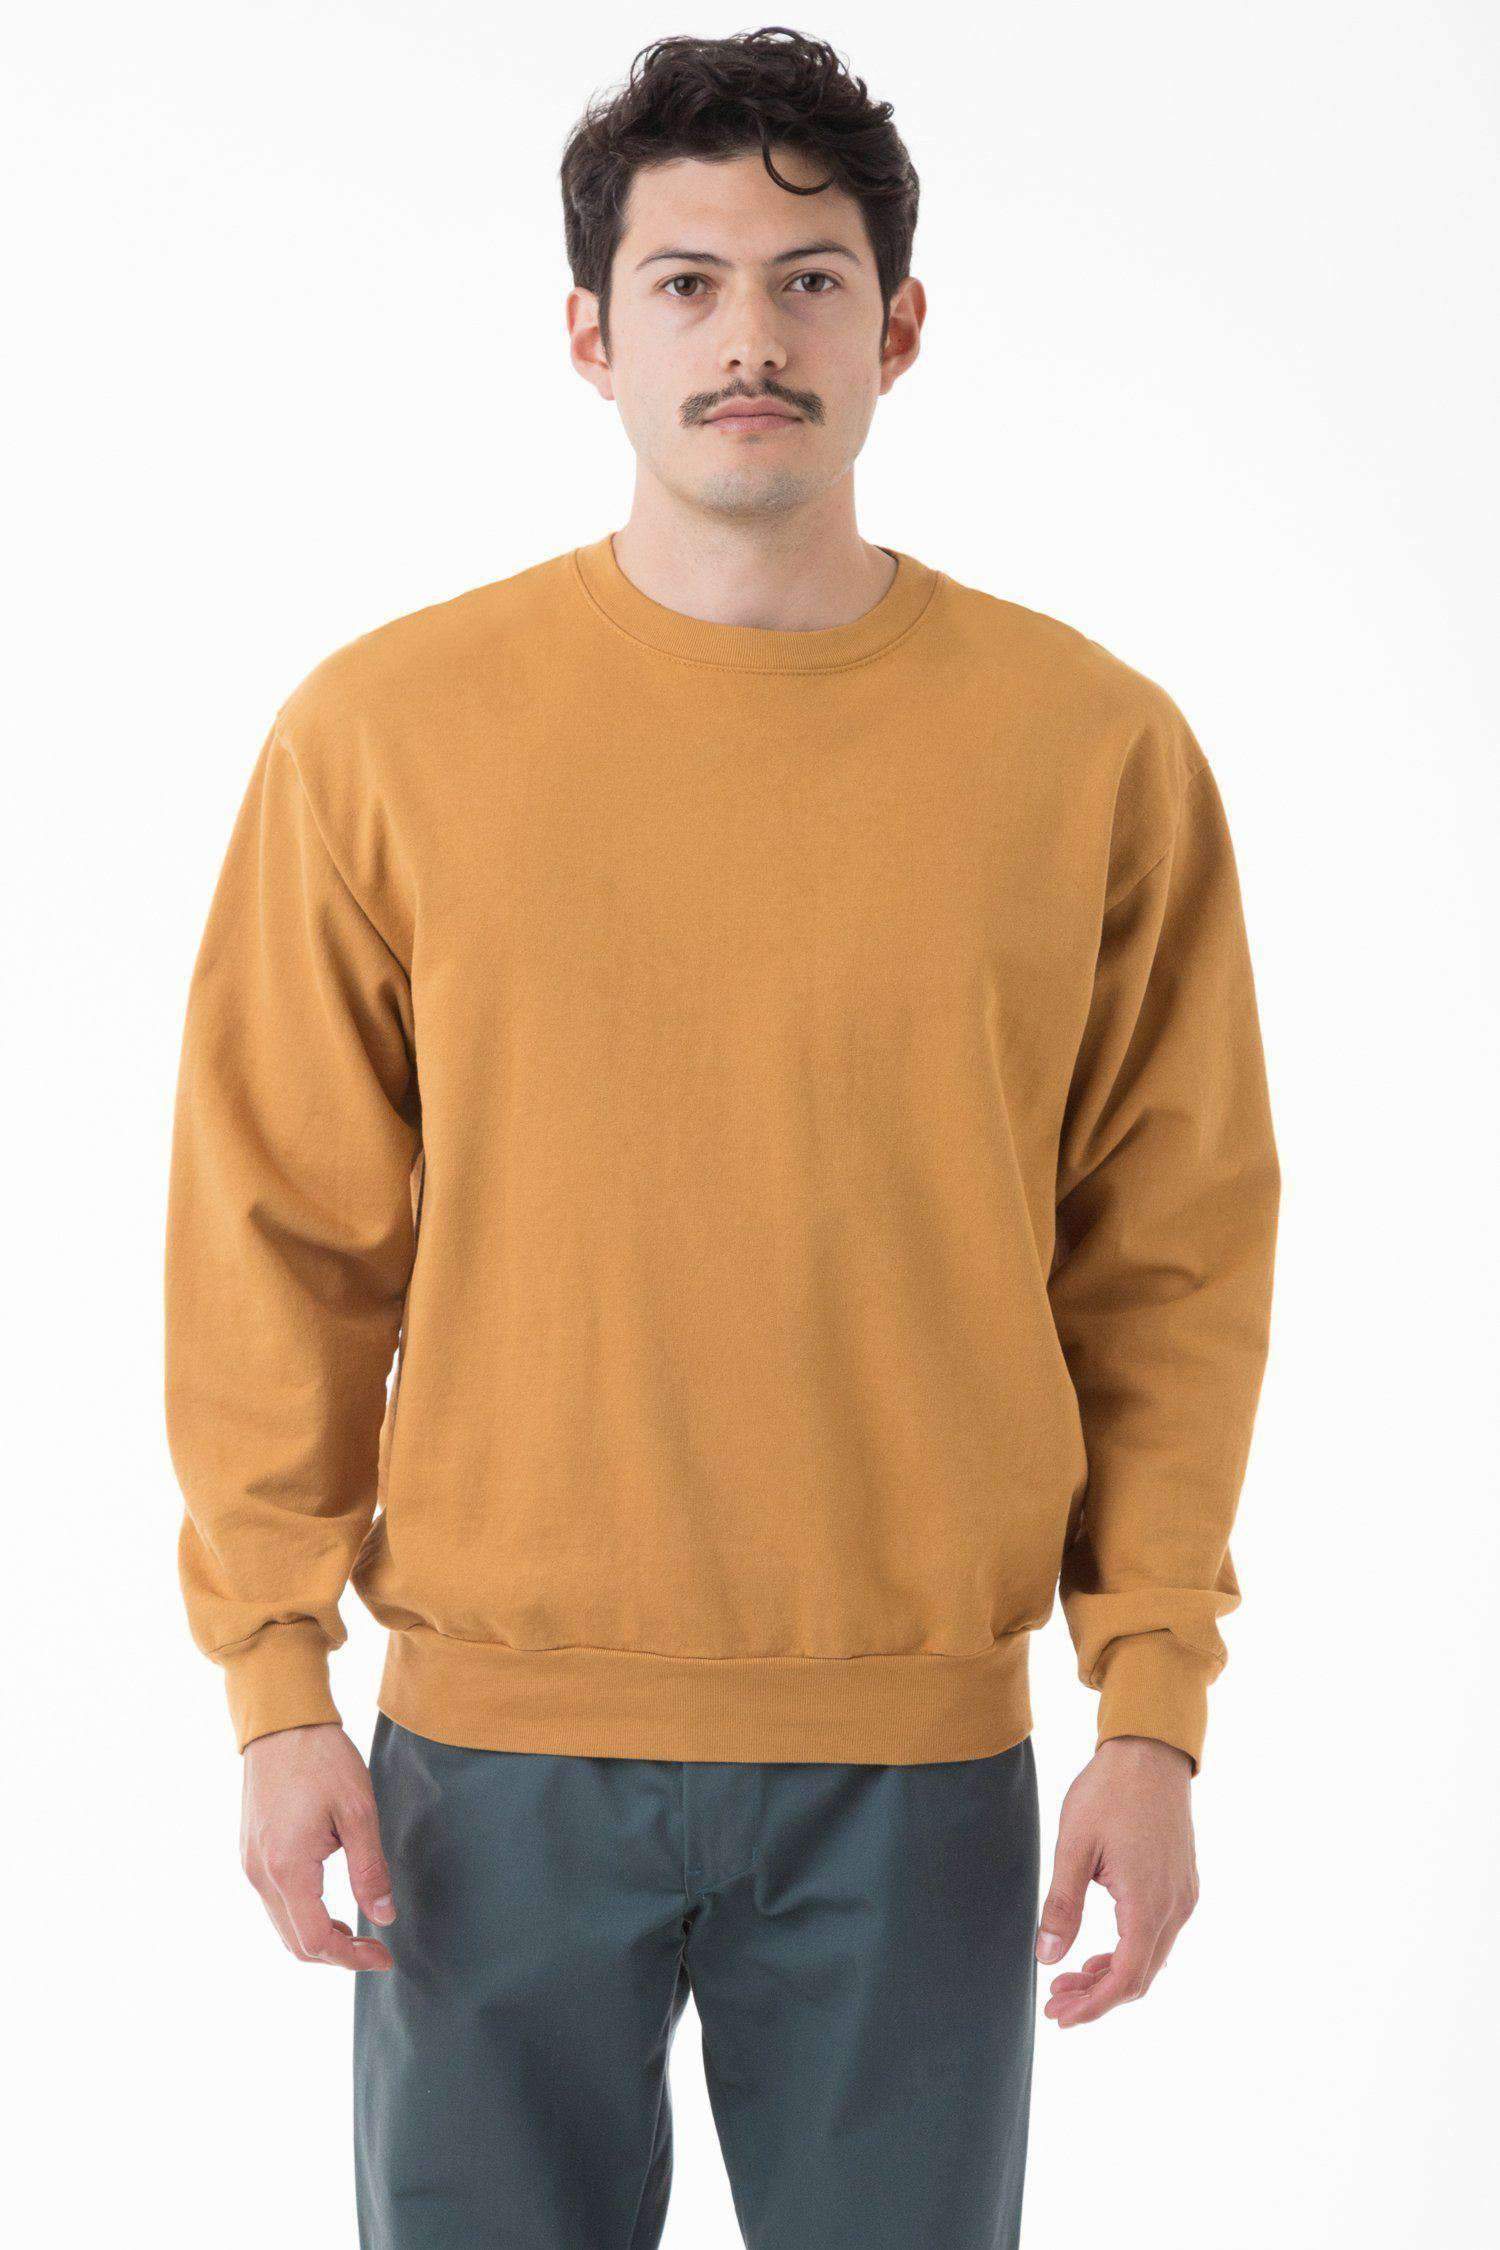 MWT07GD - Long Sleeve Garment Dye French Terry Pullover Sweatshirt Los Angeles Apparel Camel XS 